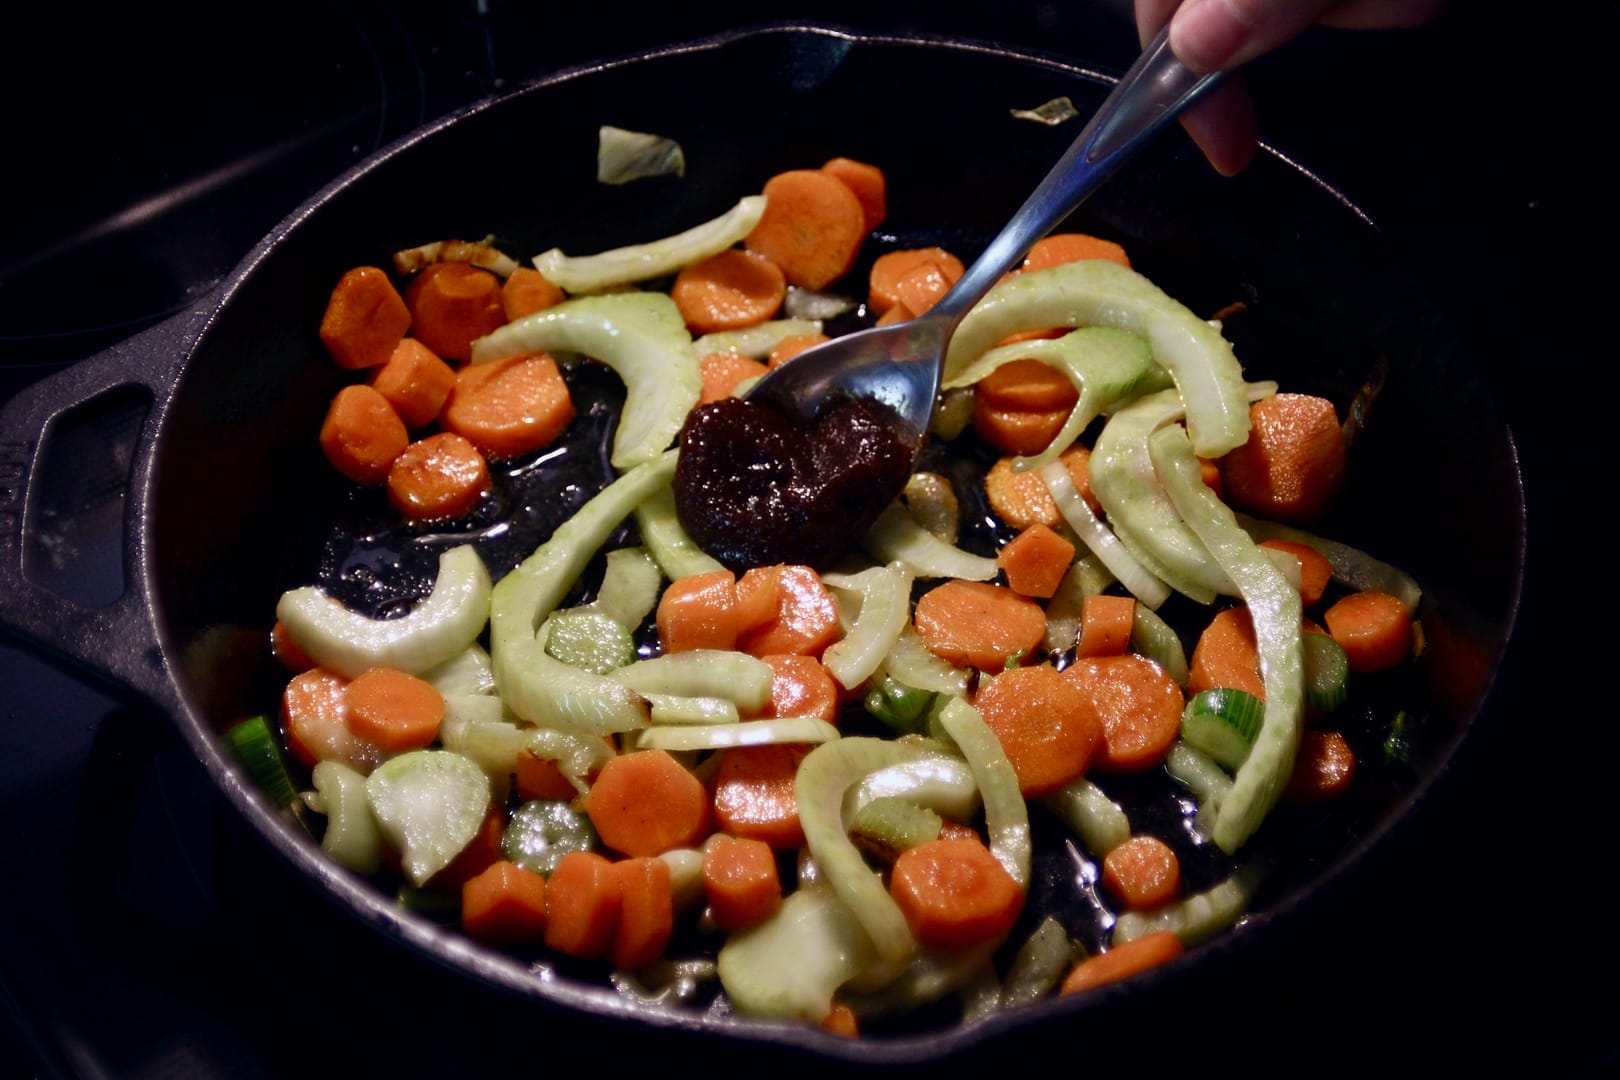 Adding bouillion to the carrots and fennel in the skillet.